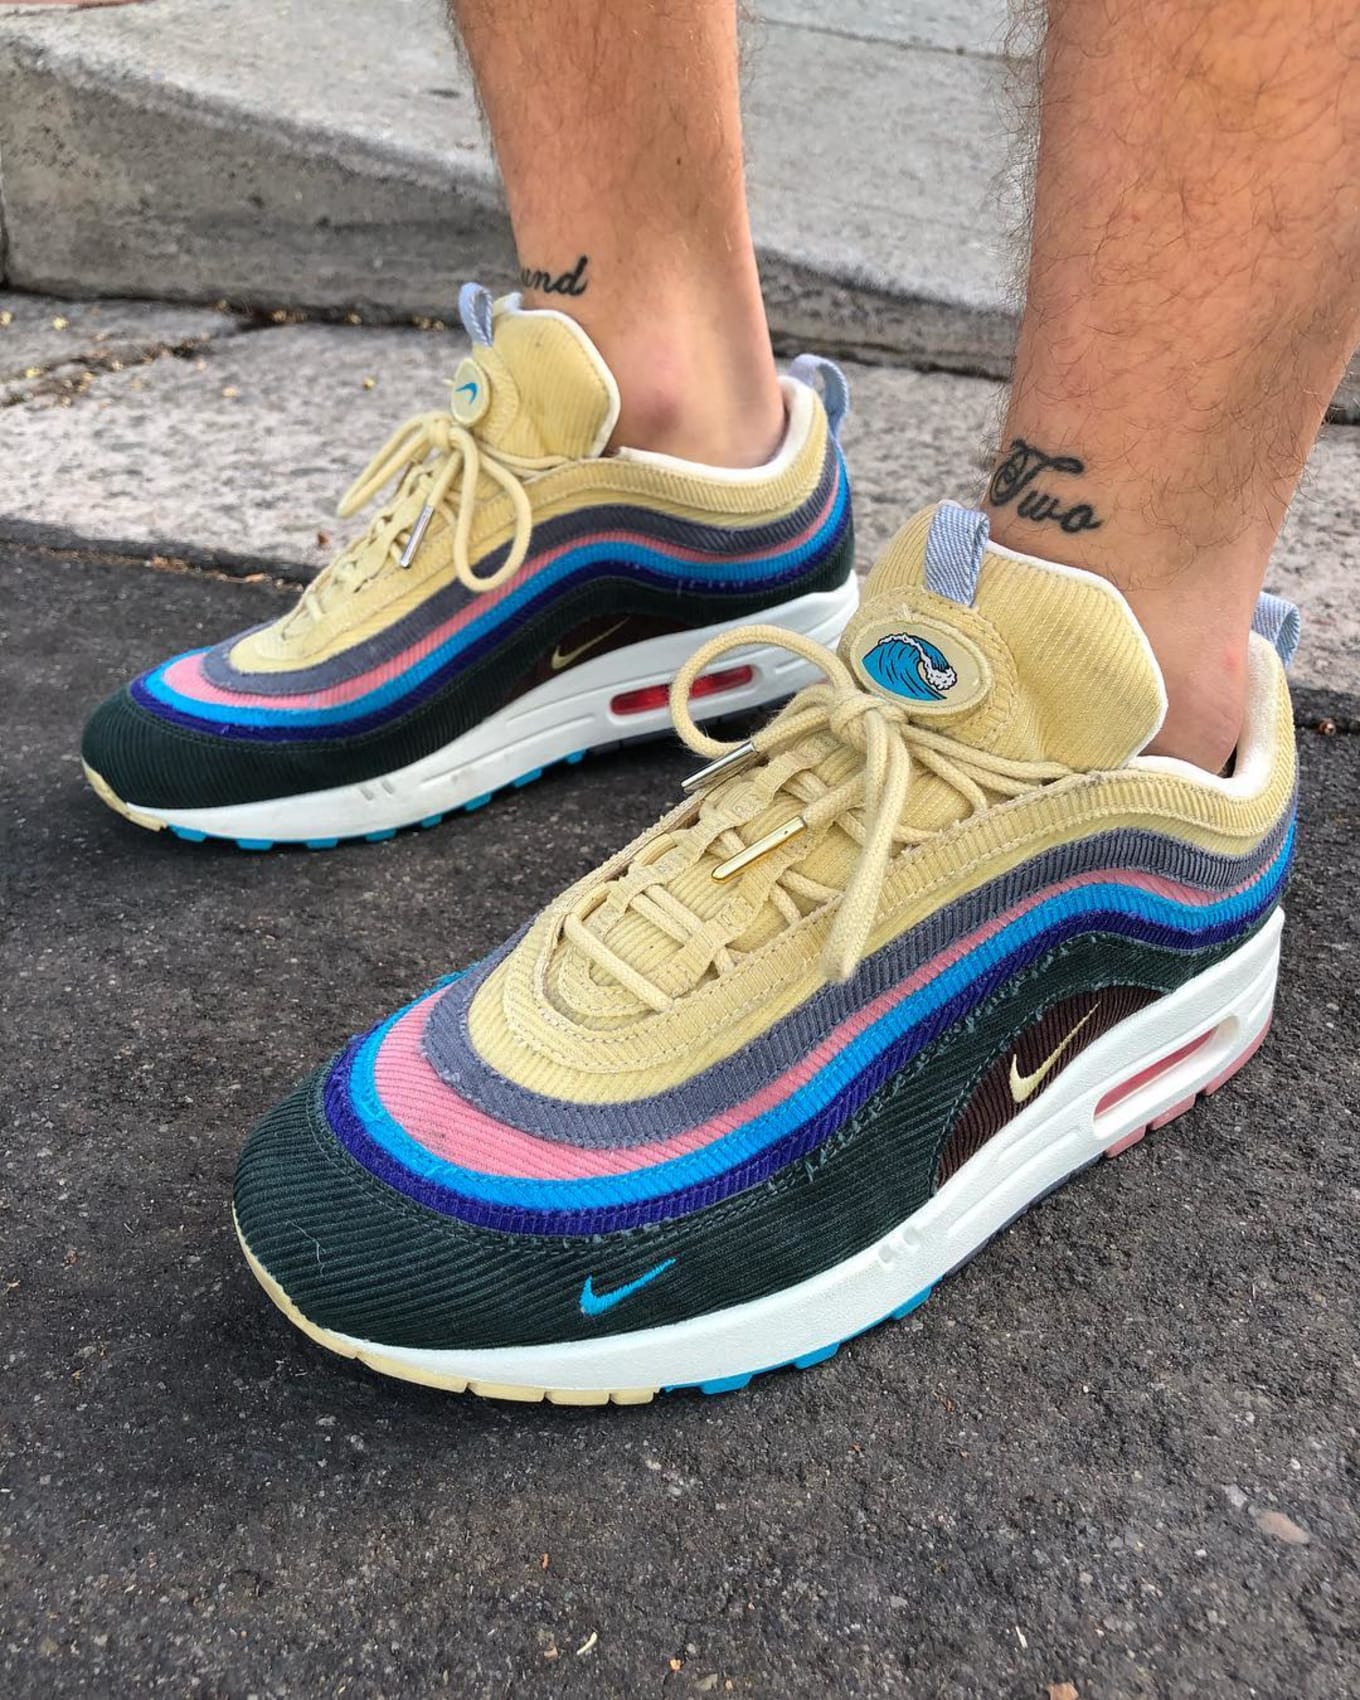 Contempt fireplace thickness Sean Wotherspoon Nike Air Max 97 x Air Max 1 Hybrid Release Date | Sole  Collector